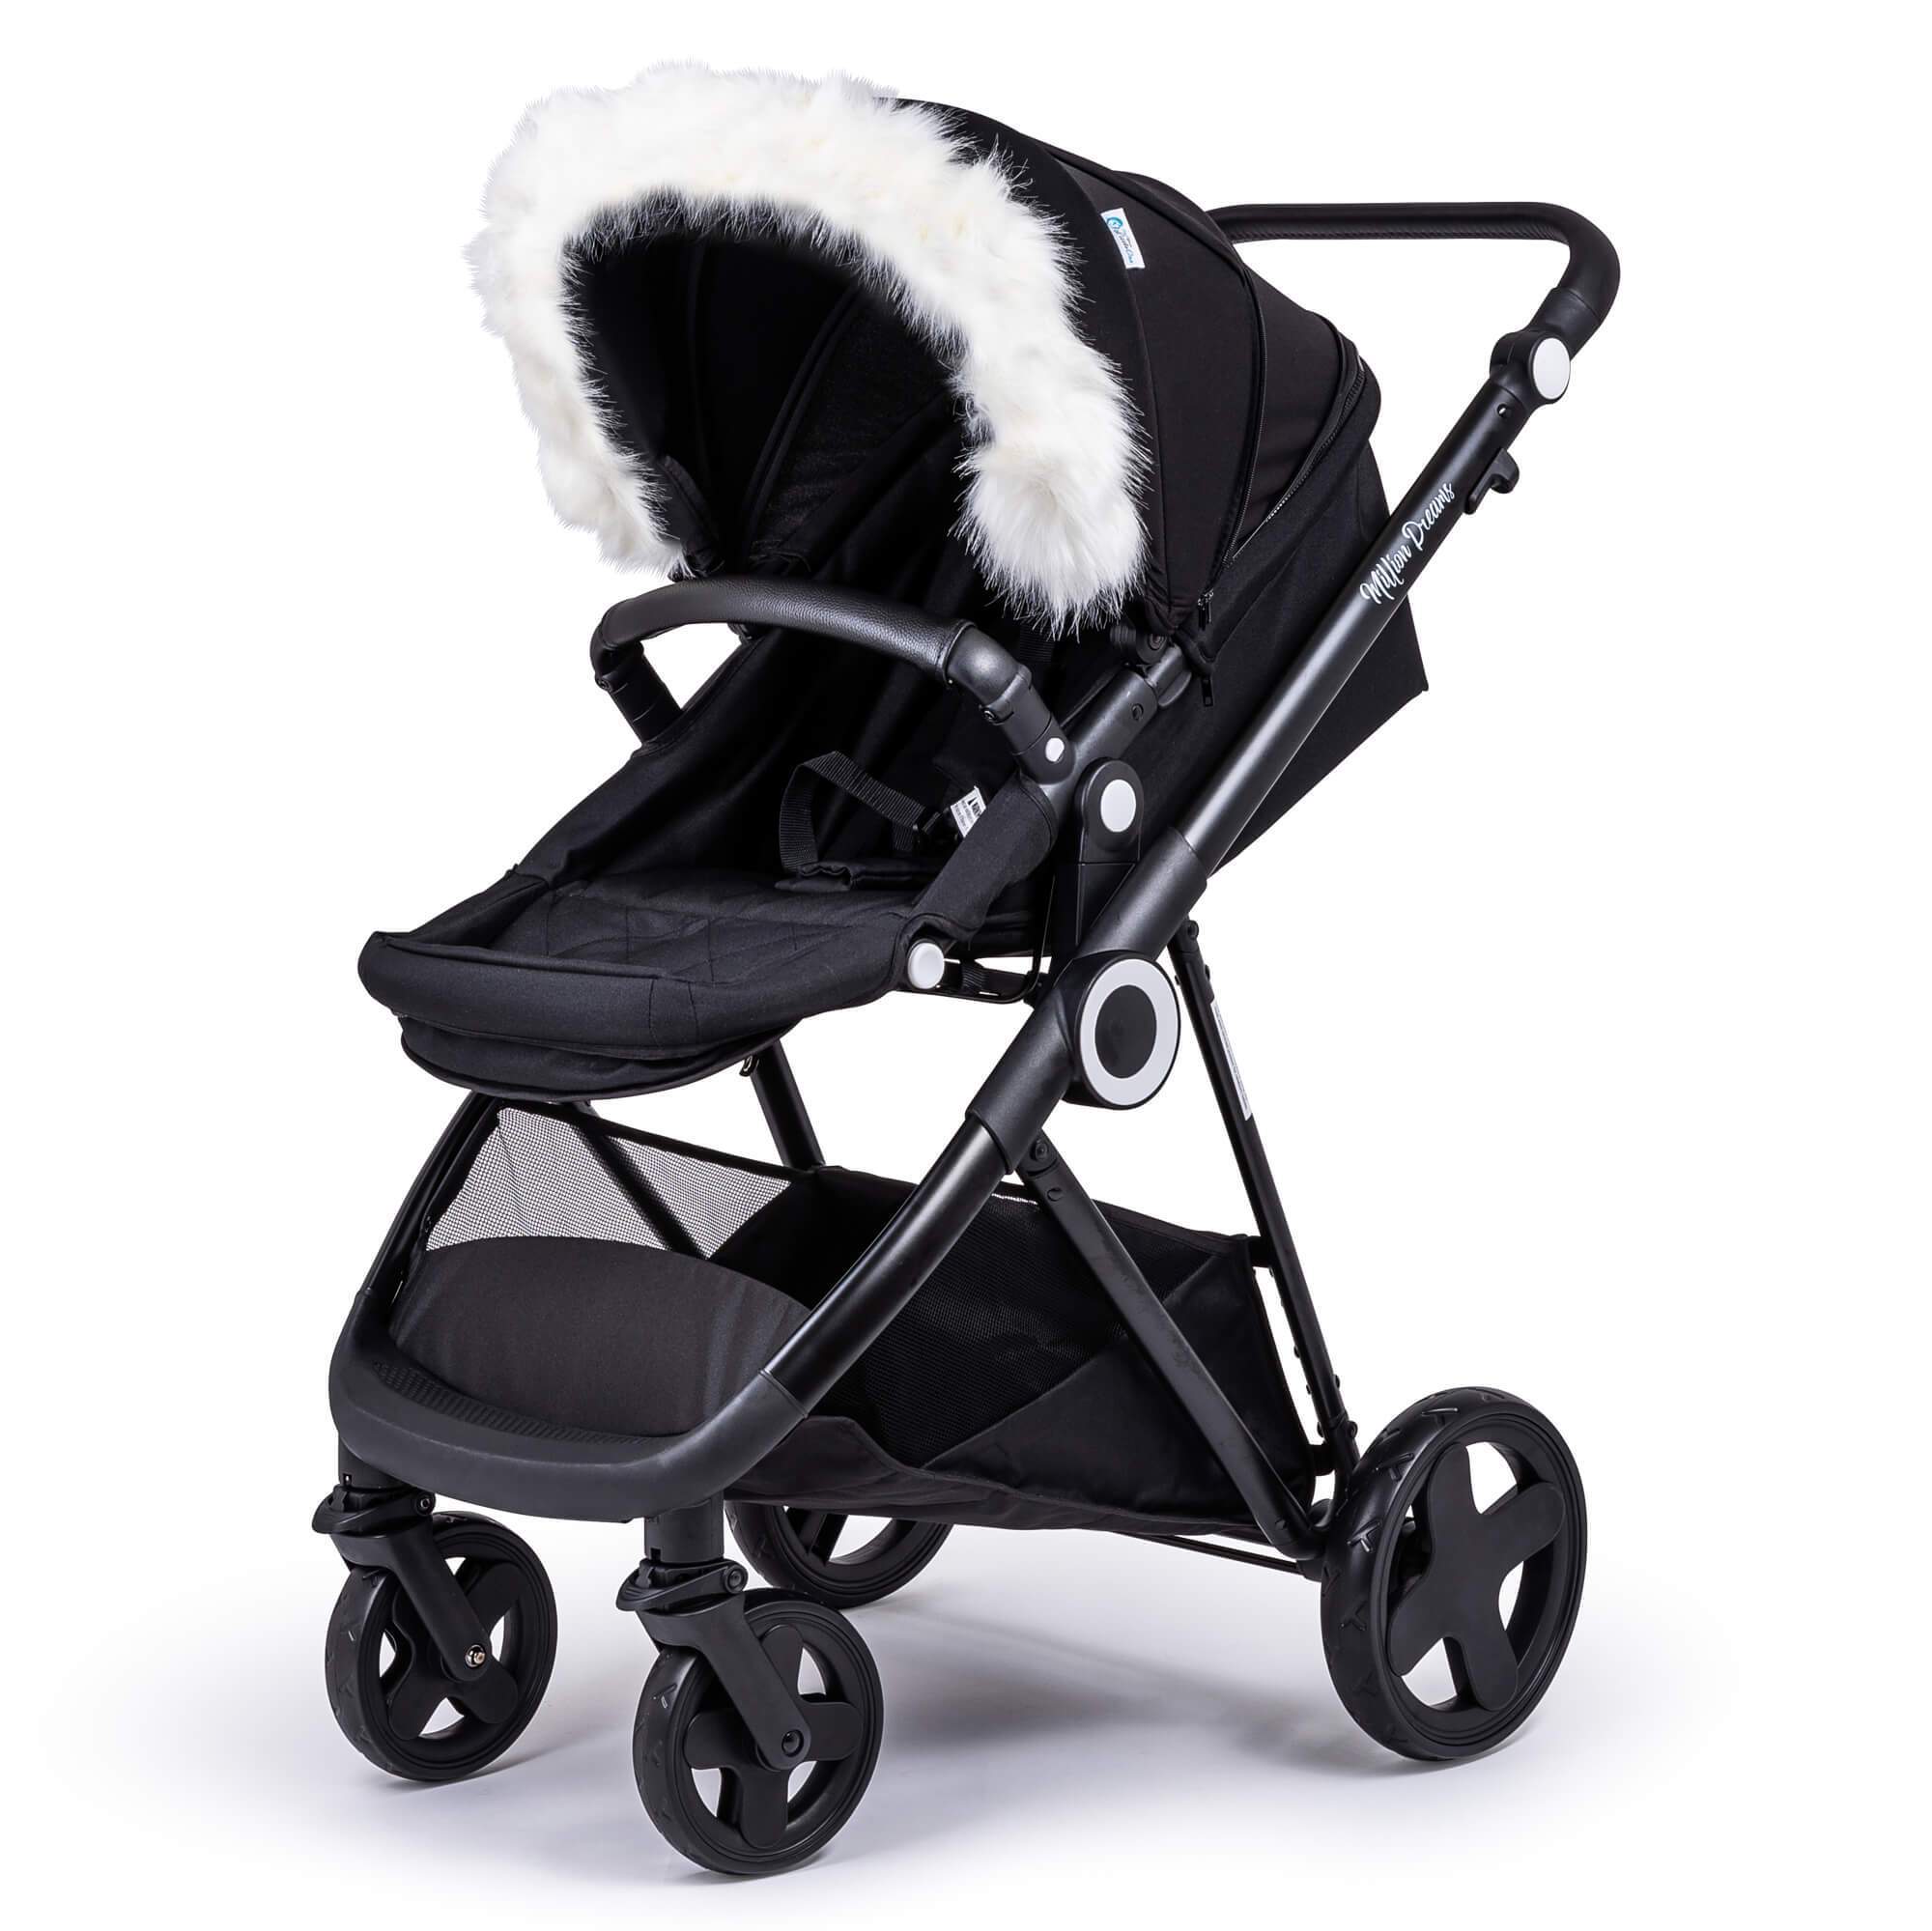 Pram Fur Hood Trim Attachment for Pushchair Compatible with Red Kite - White / Fits All Models | For Your Little One